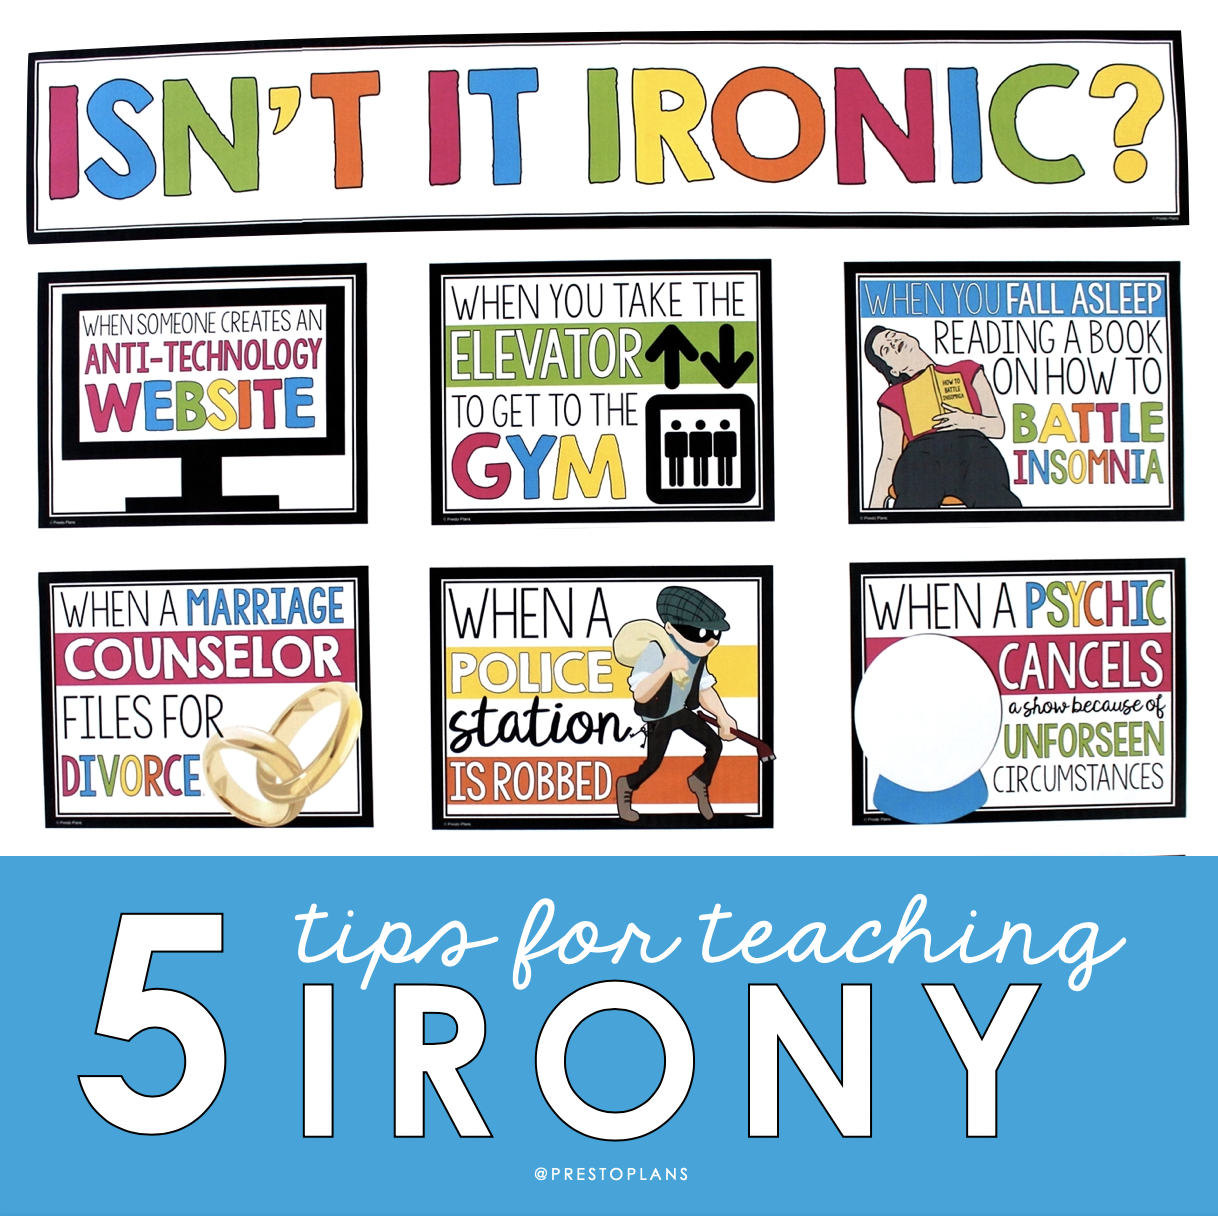 5-tips-for-teaching-irony-featured-image.png